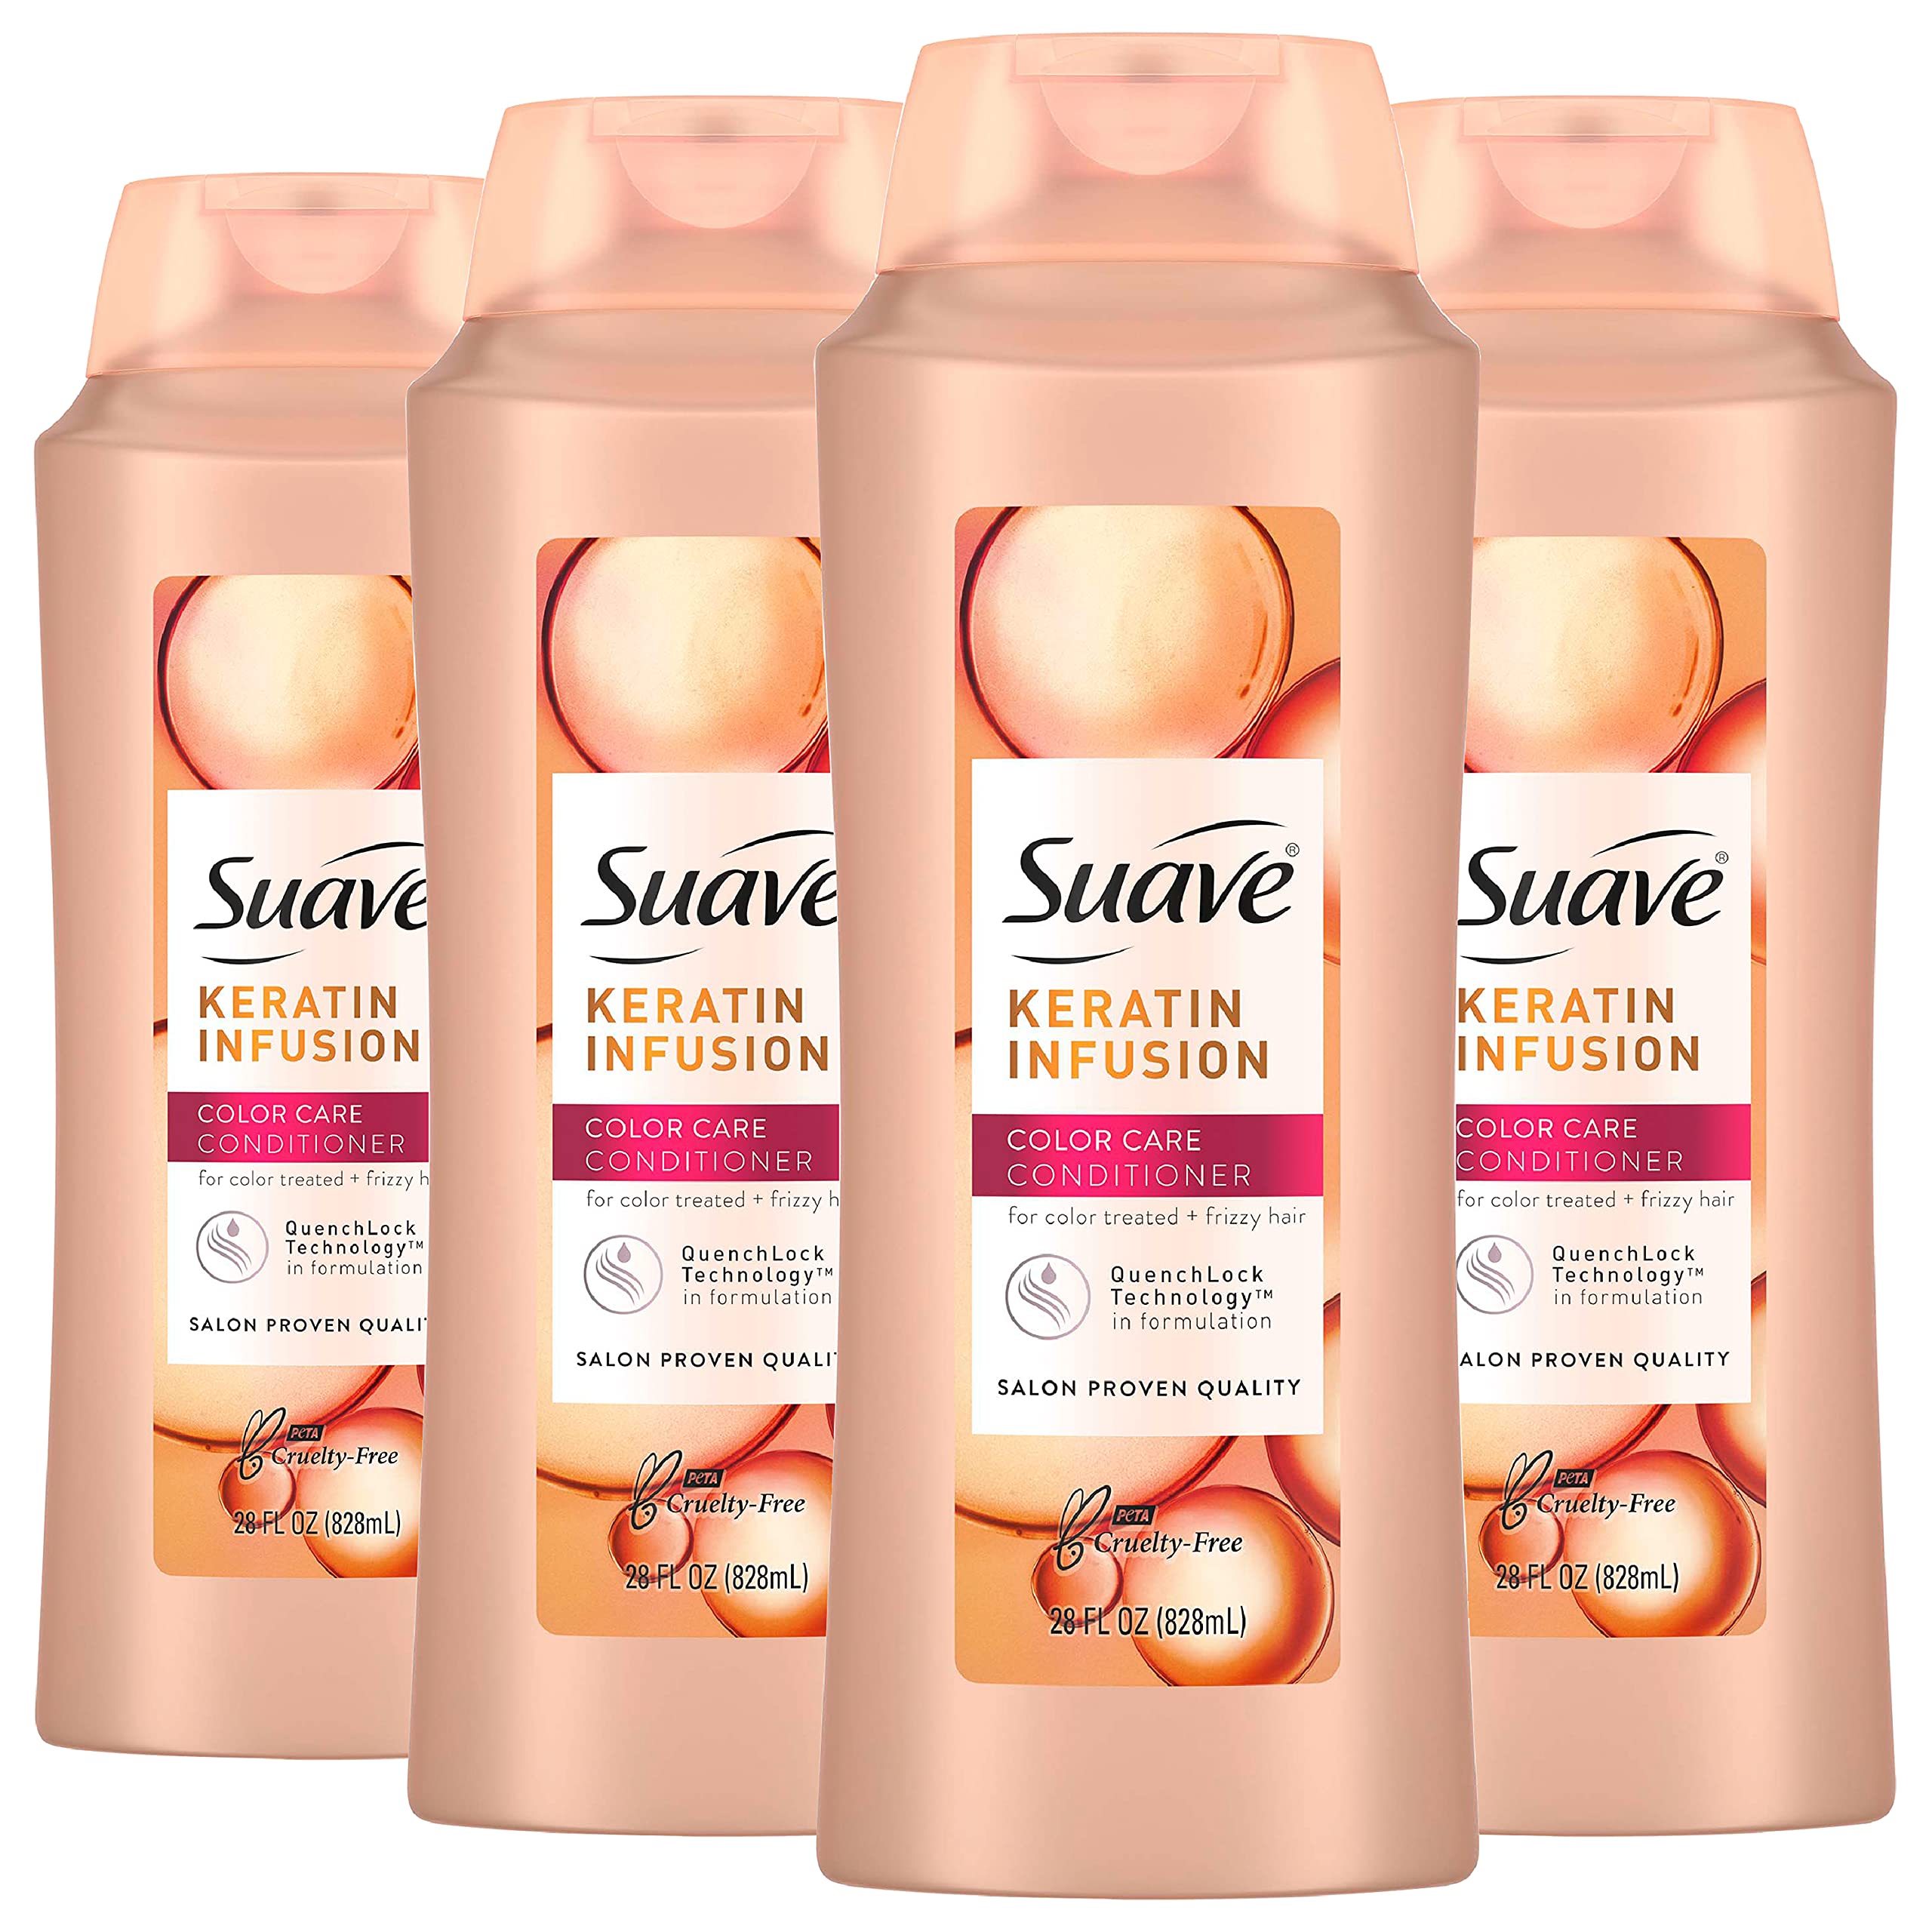 Suave Professionals Color Care Conditioner for Color-Treated and Frizzy Hair Keratin Infusion Hair Conditioner with 48-hour Frizz Control 28 oz, Pack of 4